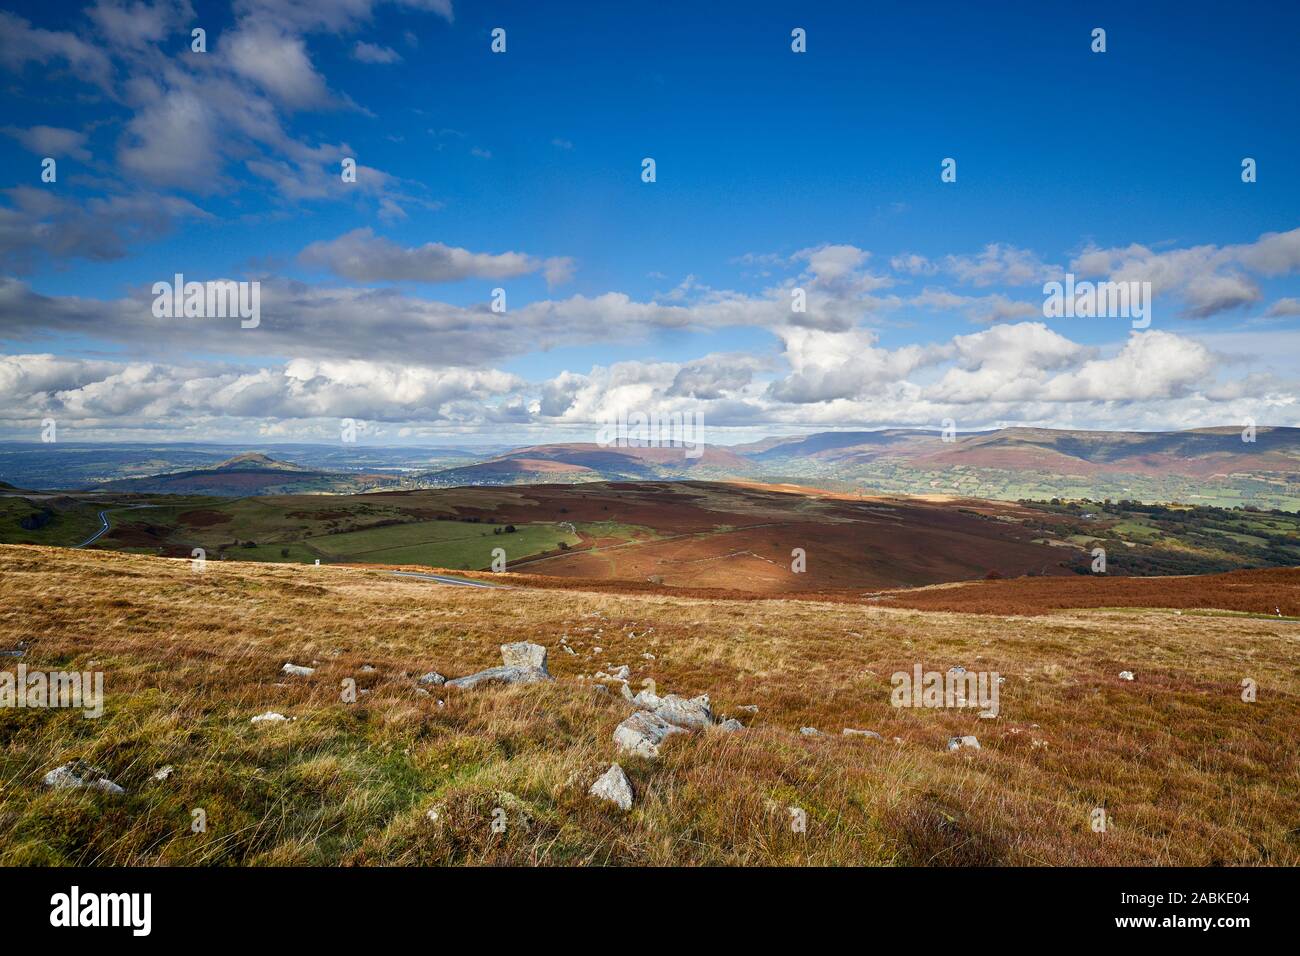 The spectacular view of the moorland of The Brecon Beacons National Park on a bright and sunny autumn day, Powys, Wales, Great Britain, UK Stock Photo